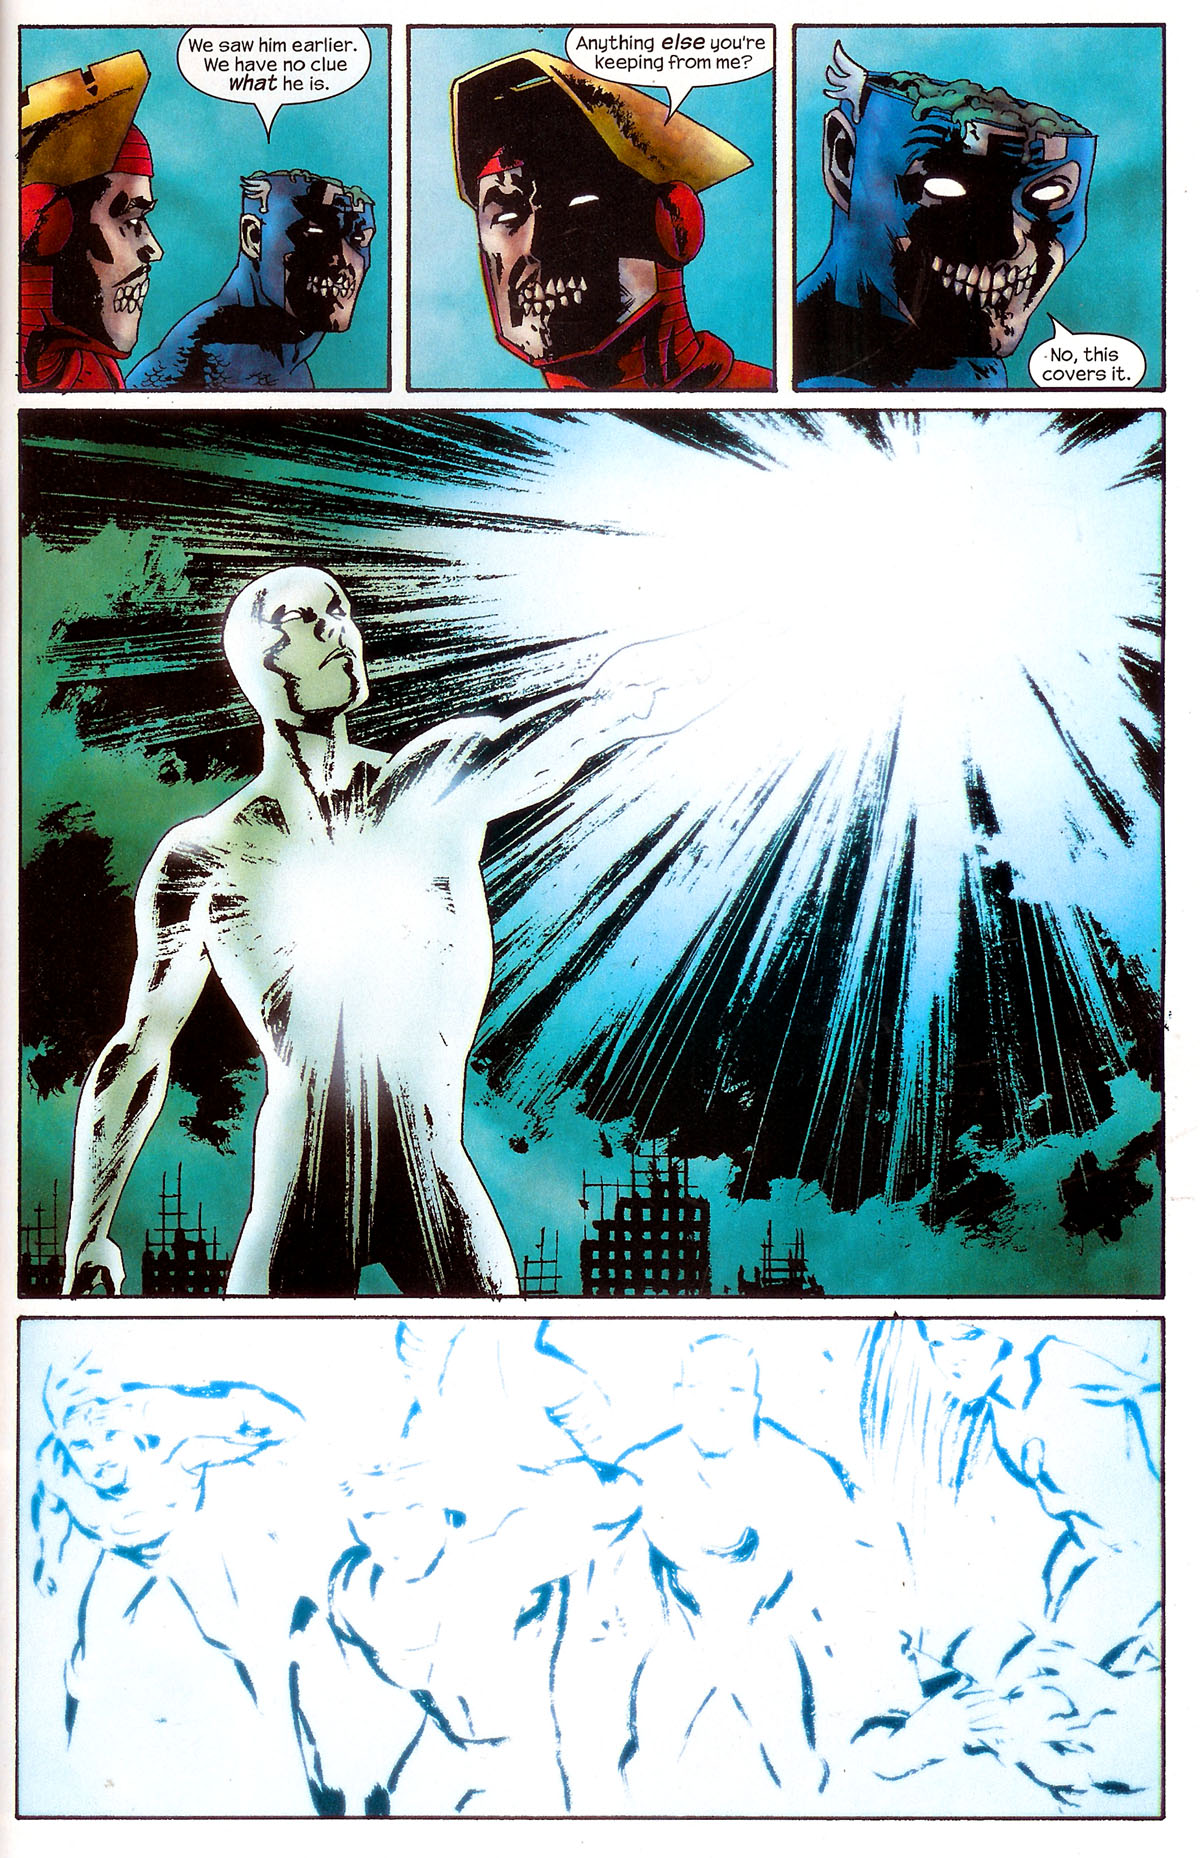 Marvel Zombies 1. Part 2 of 5